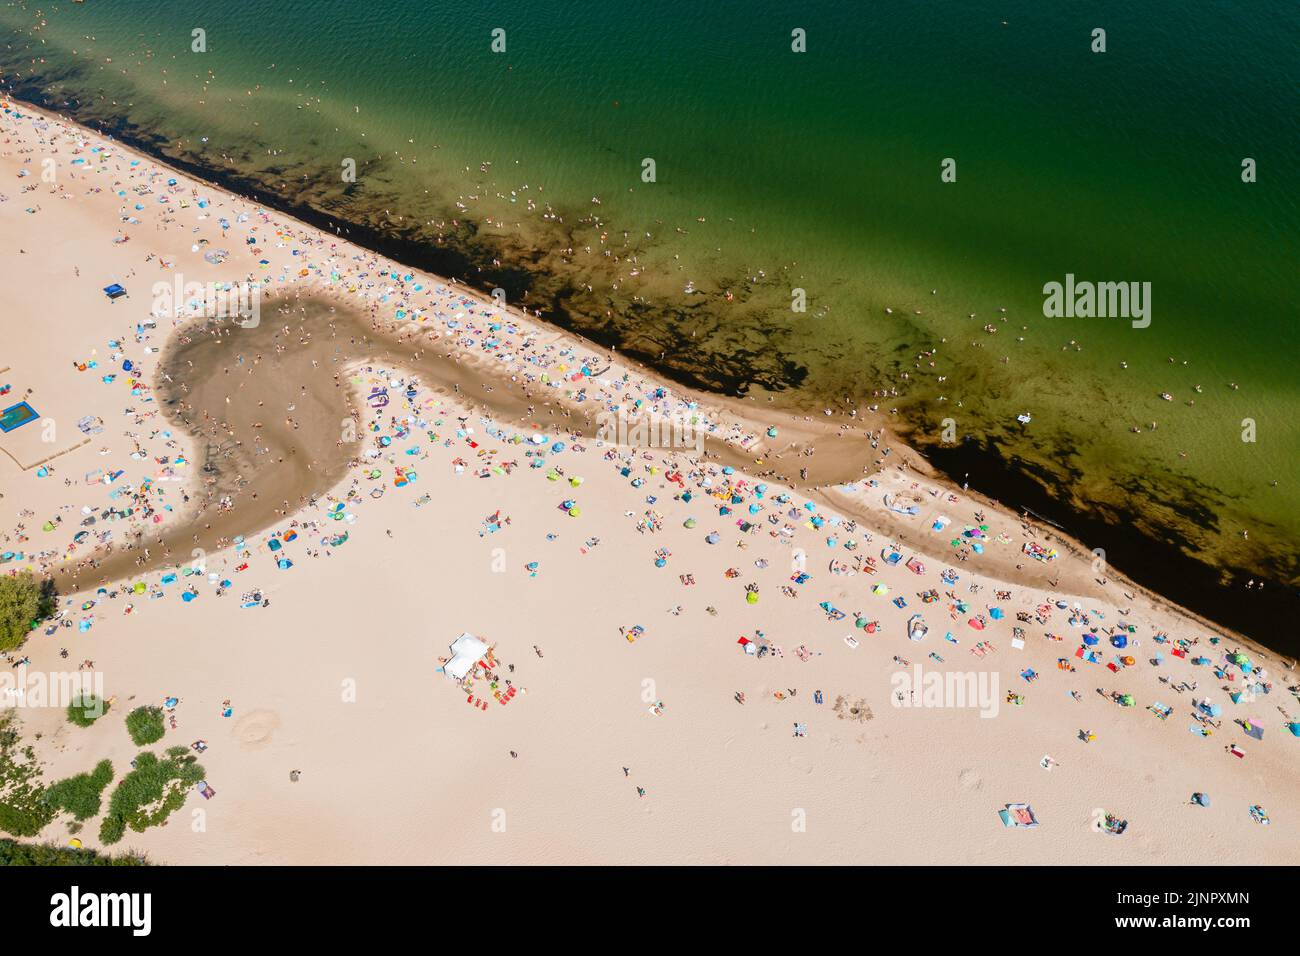 Baltic coast, people having bath in the sea and in the Oliwski stream mouth to the sea during hot summertime weekend Stock Photo